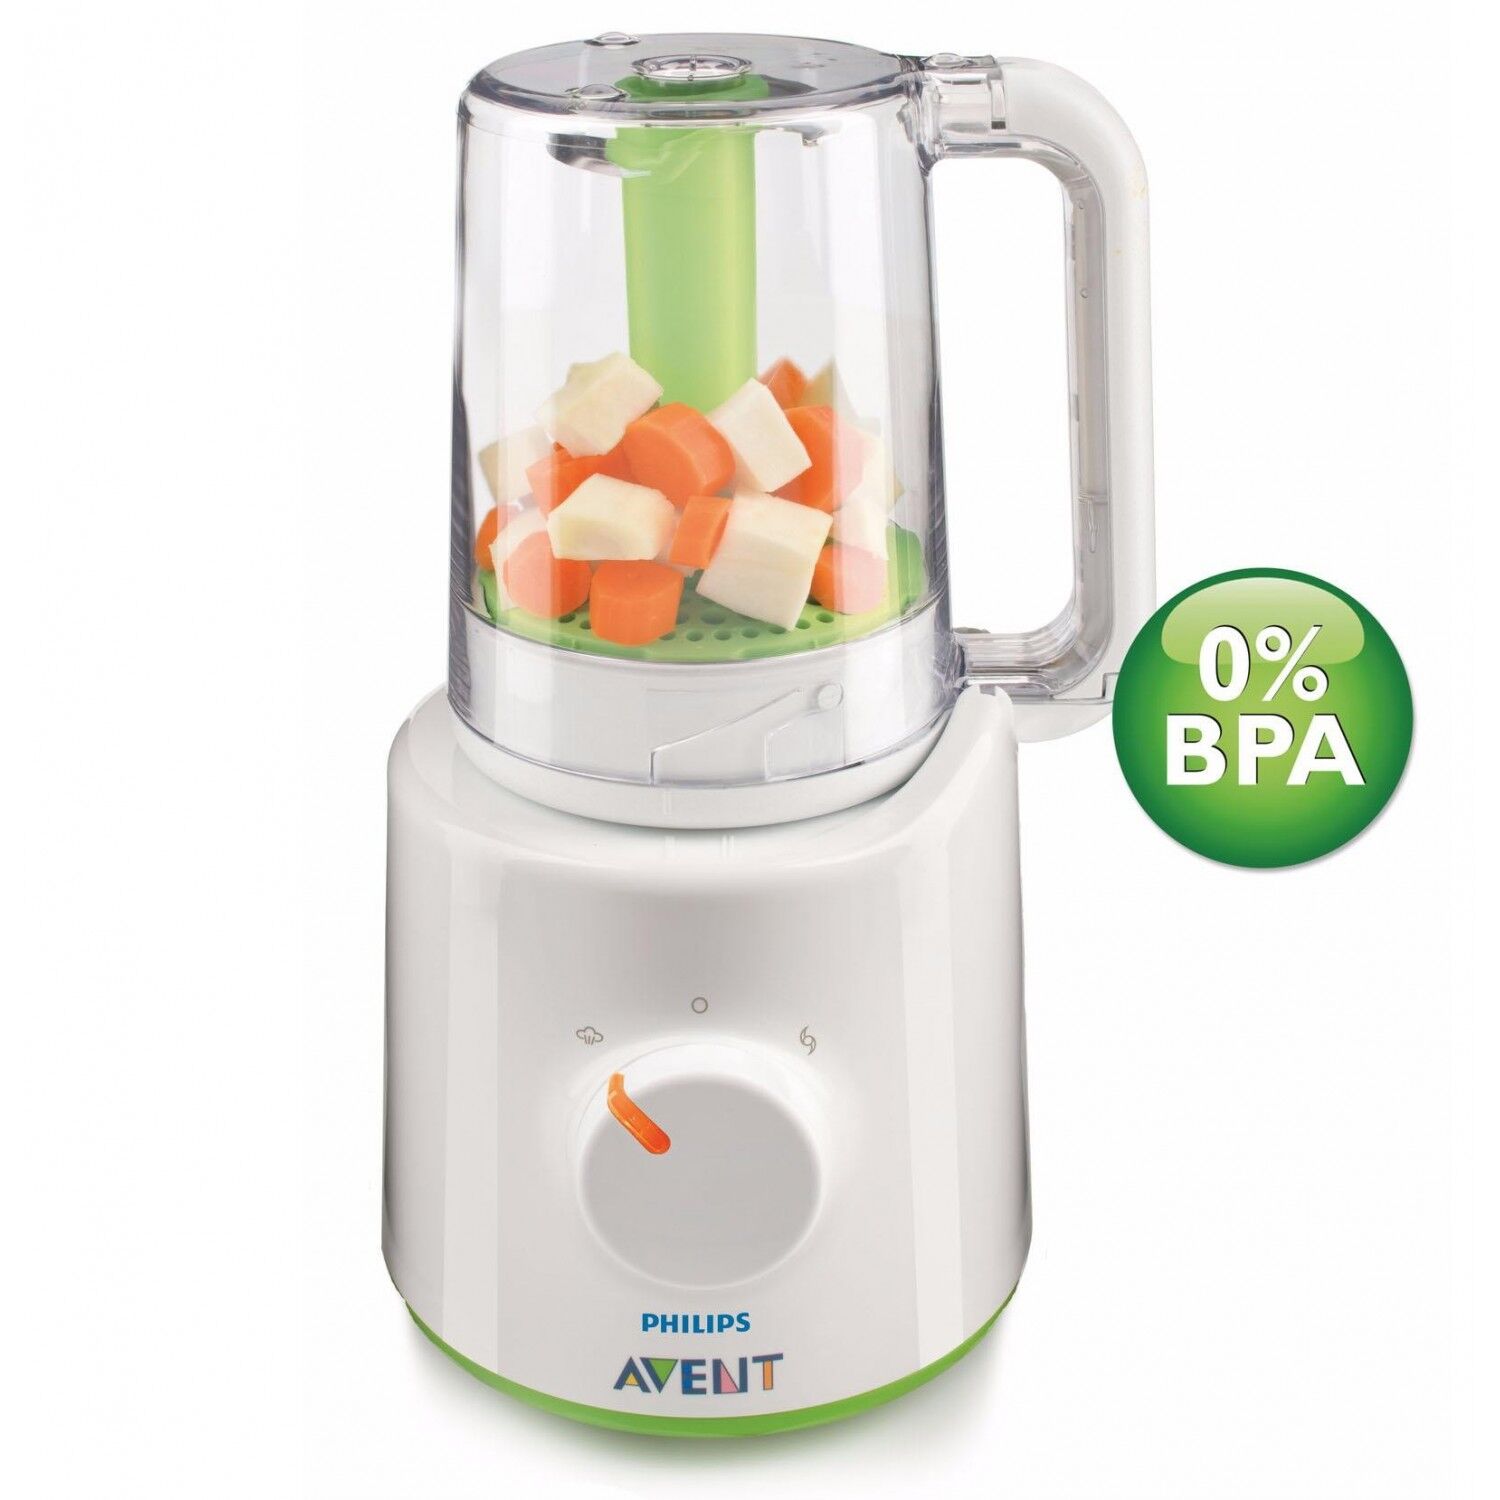 Avent Philips EasyPappa 2 in 1 Avent Philips